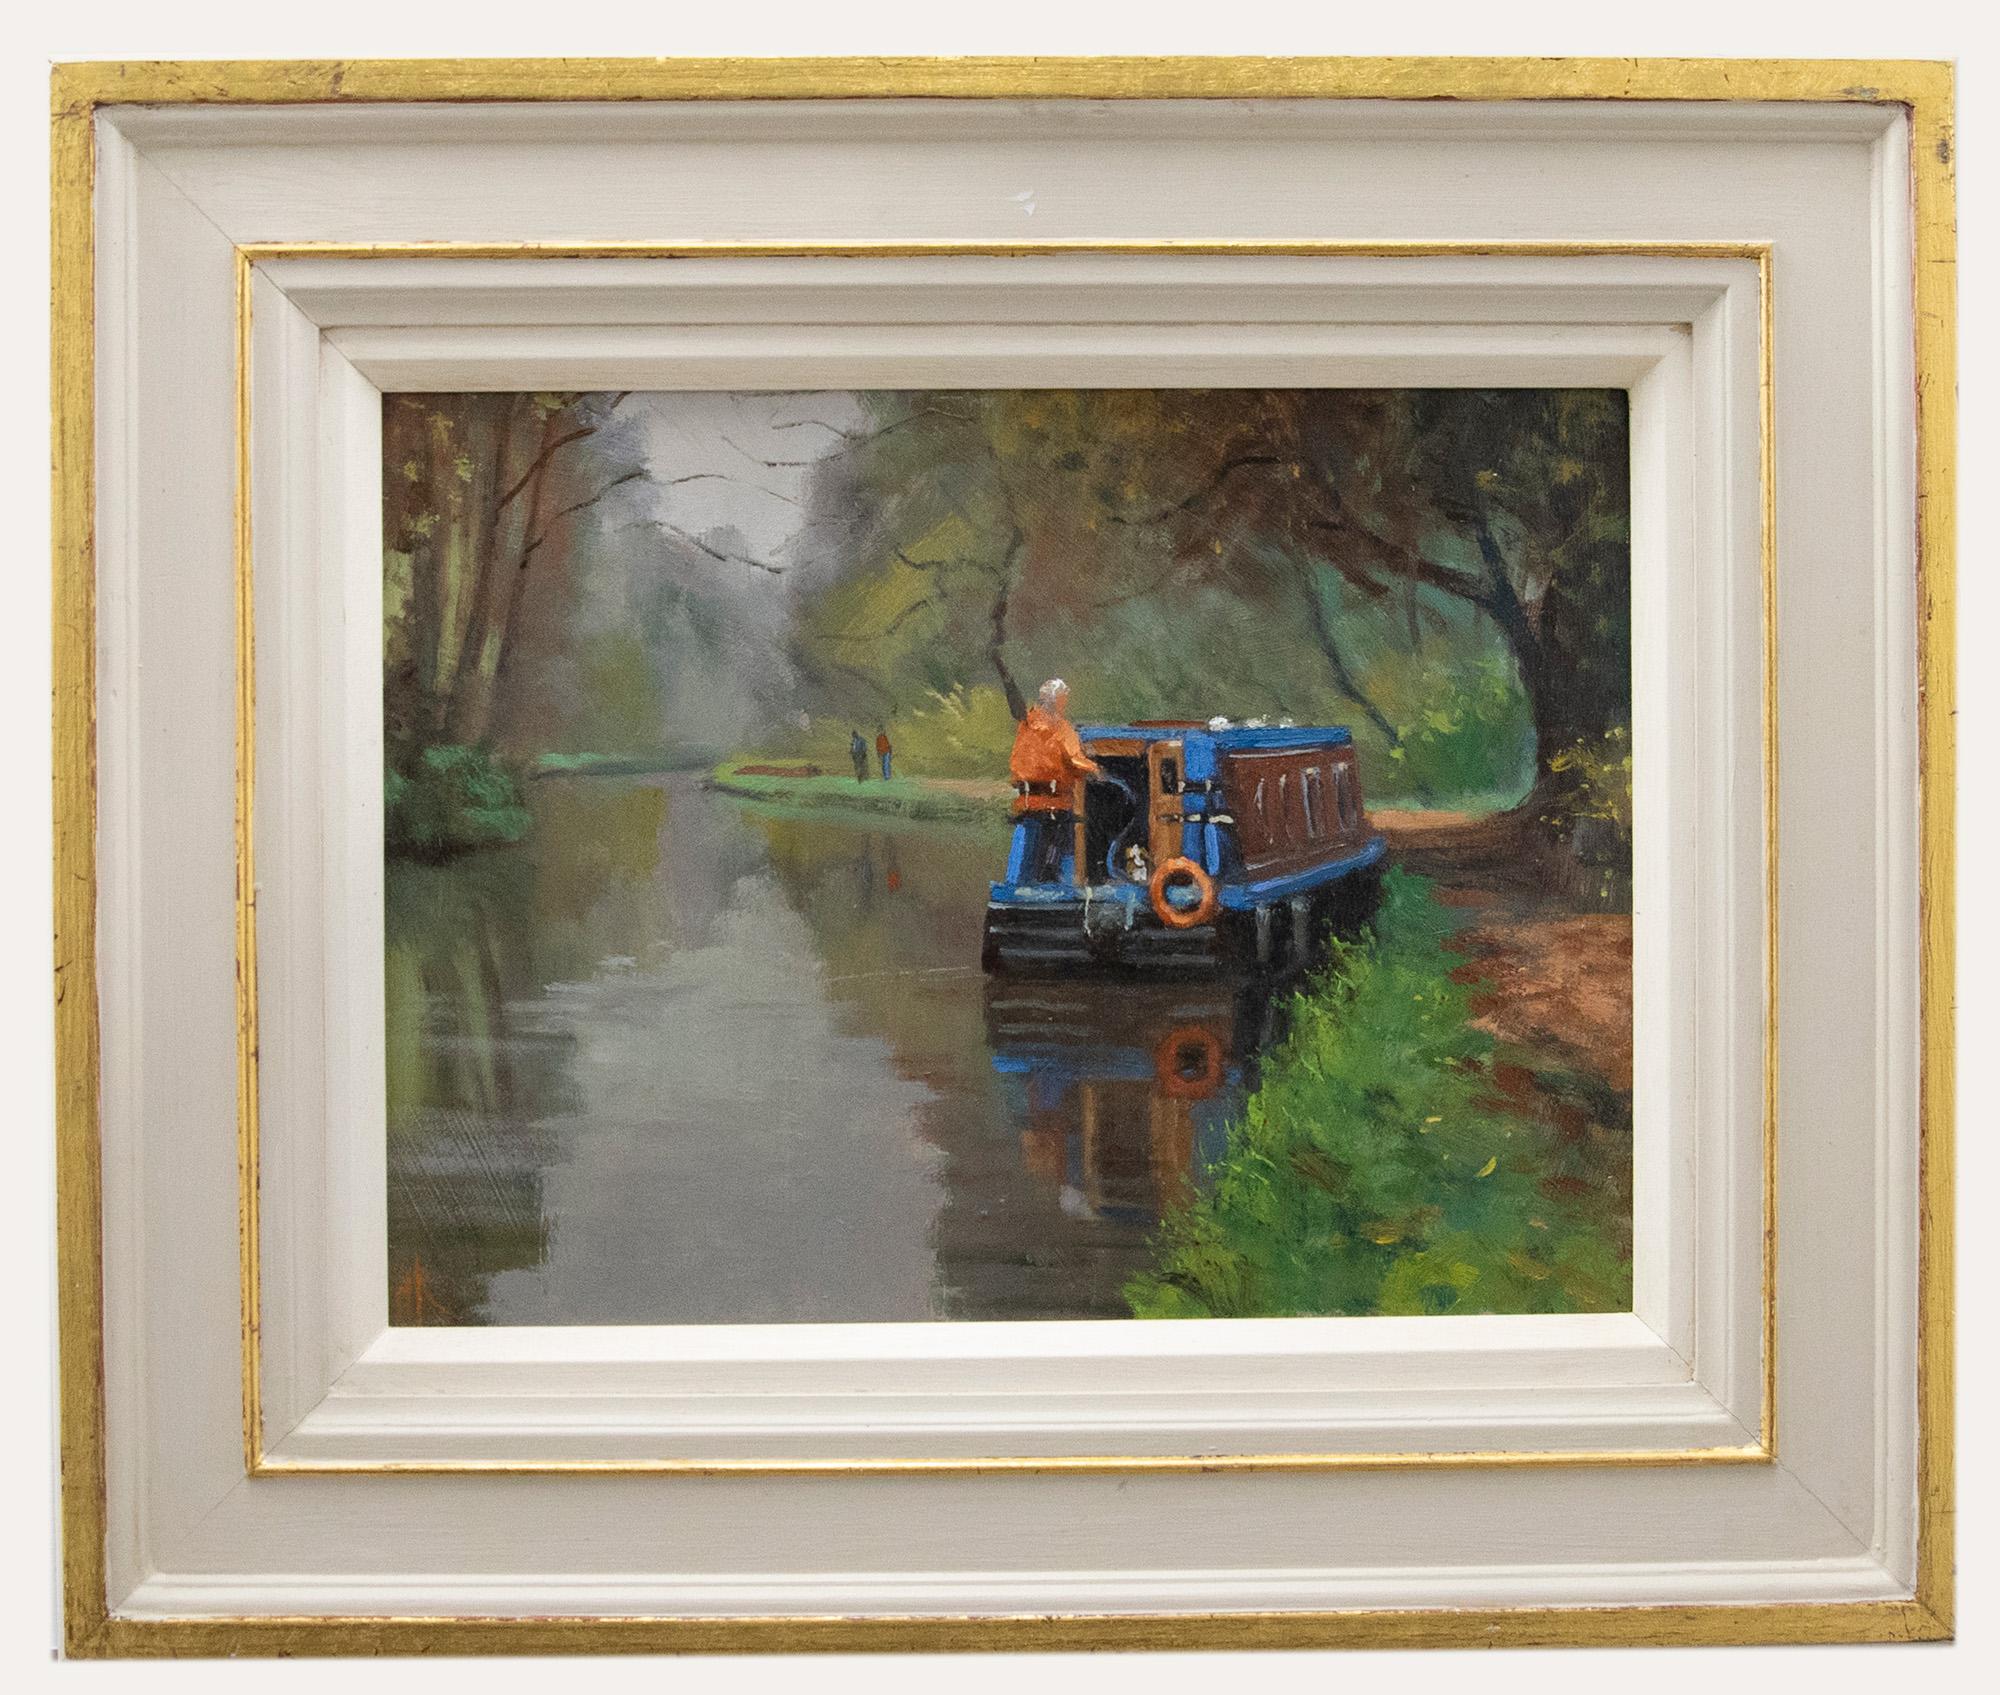 Unknown Landscape Painting - Michael Richardson - Framed Contemporary Oil, Sea Otter 'Christina IV'